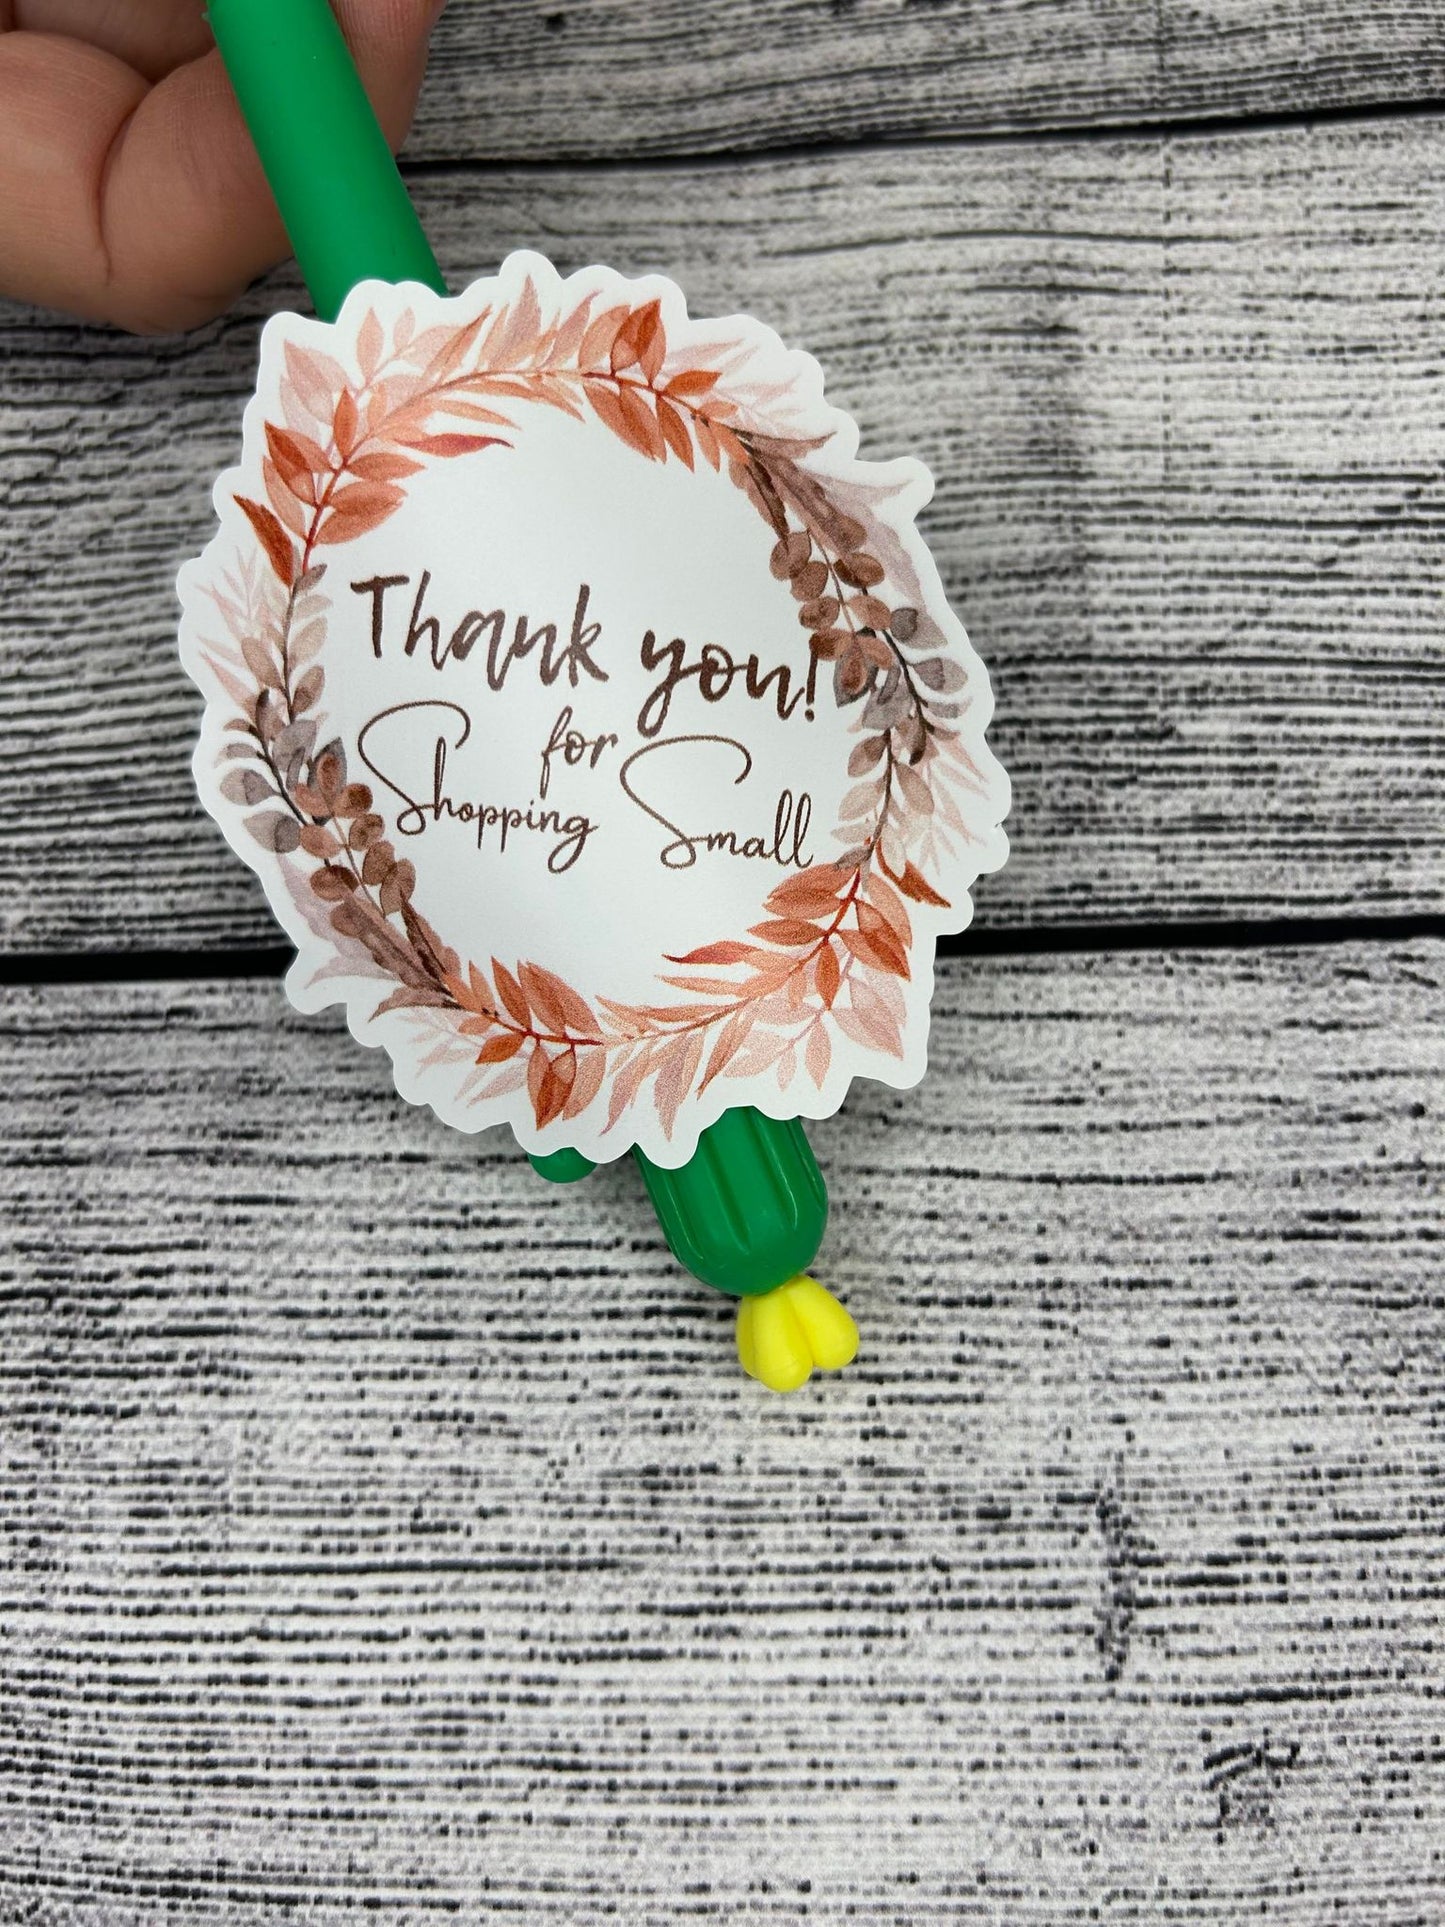 Thank you for shopping small wreath Sheet